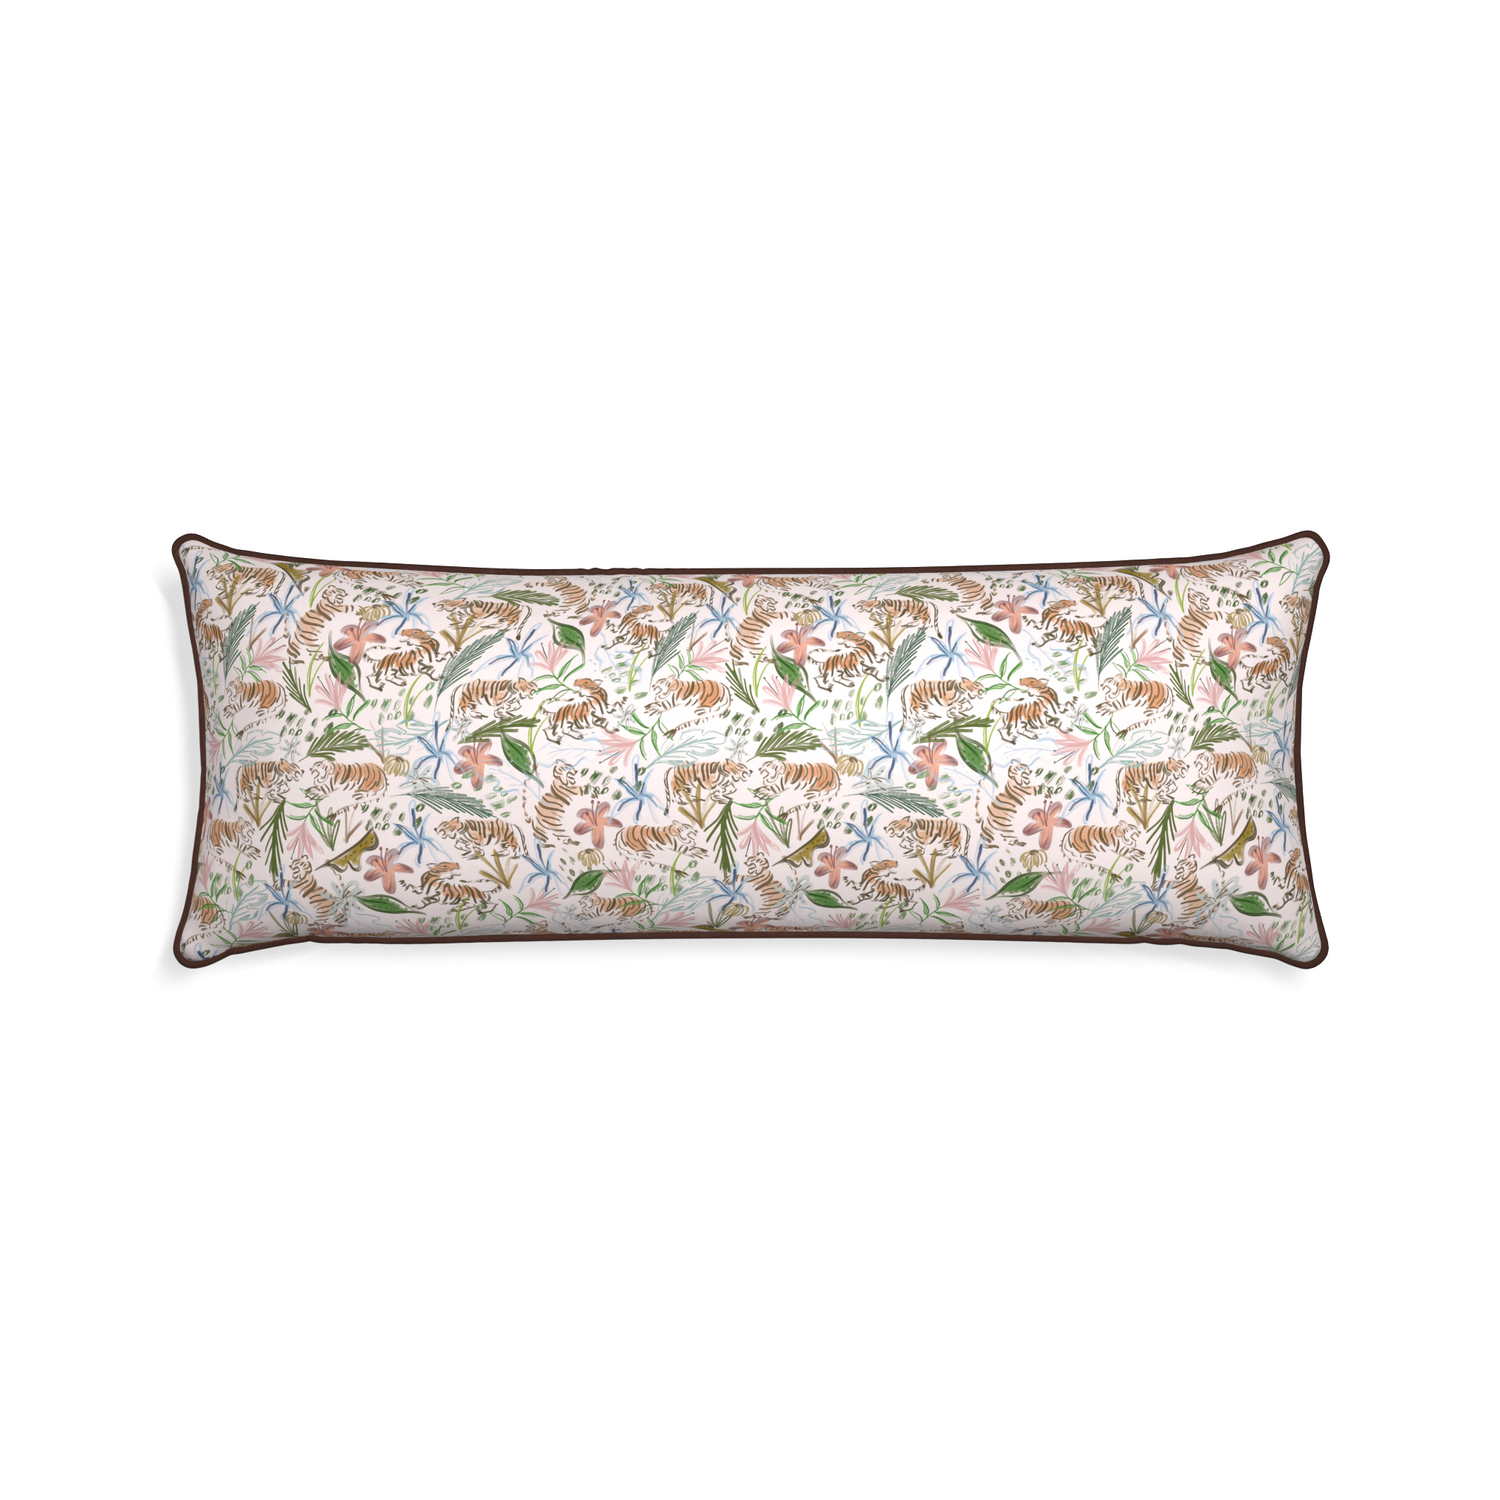 Xl-lumbar frida pink custom pink chinoiserie tigerpillow with w piping on white background